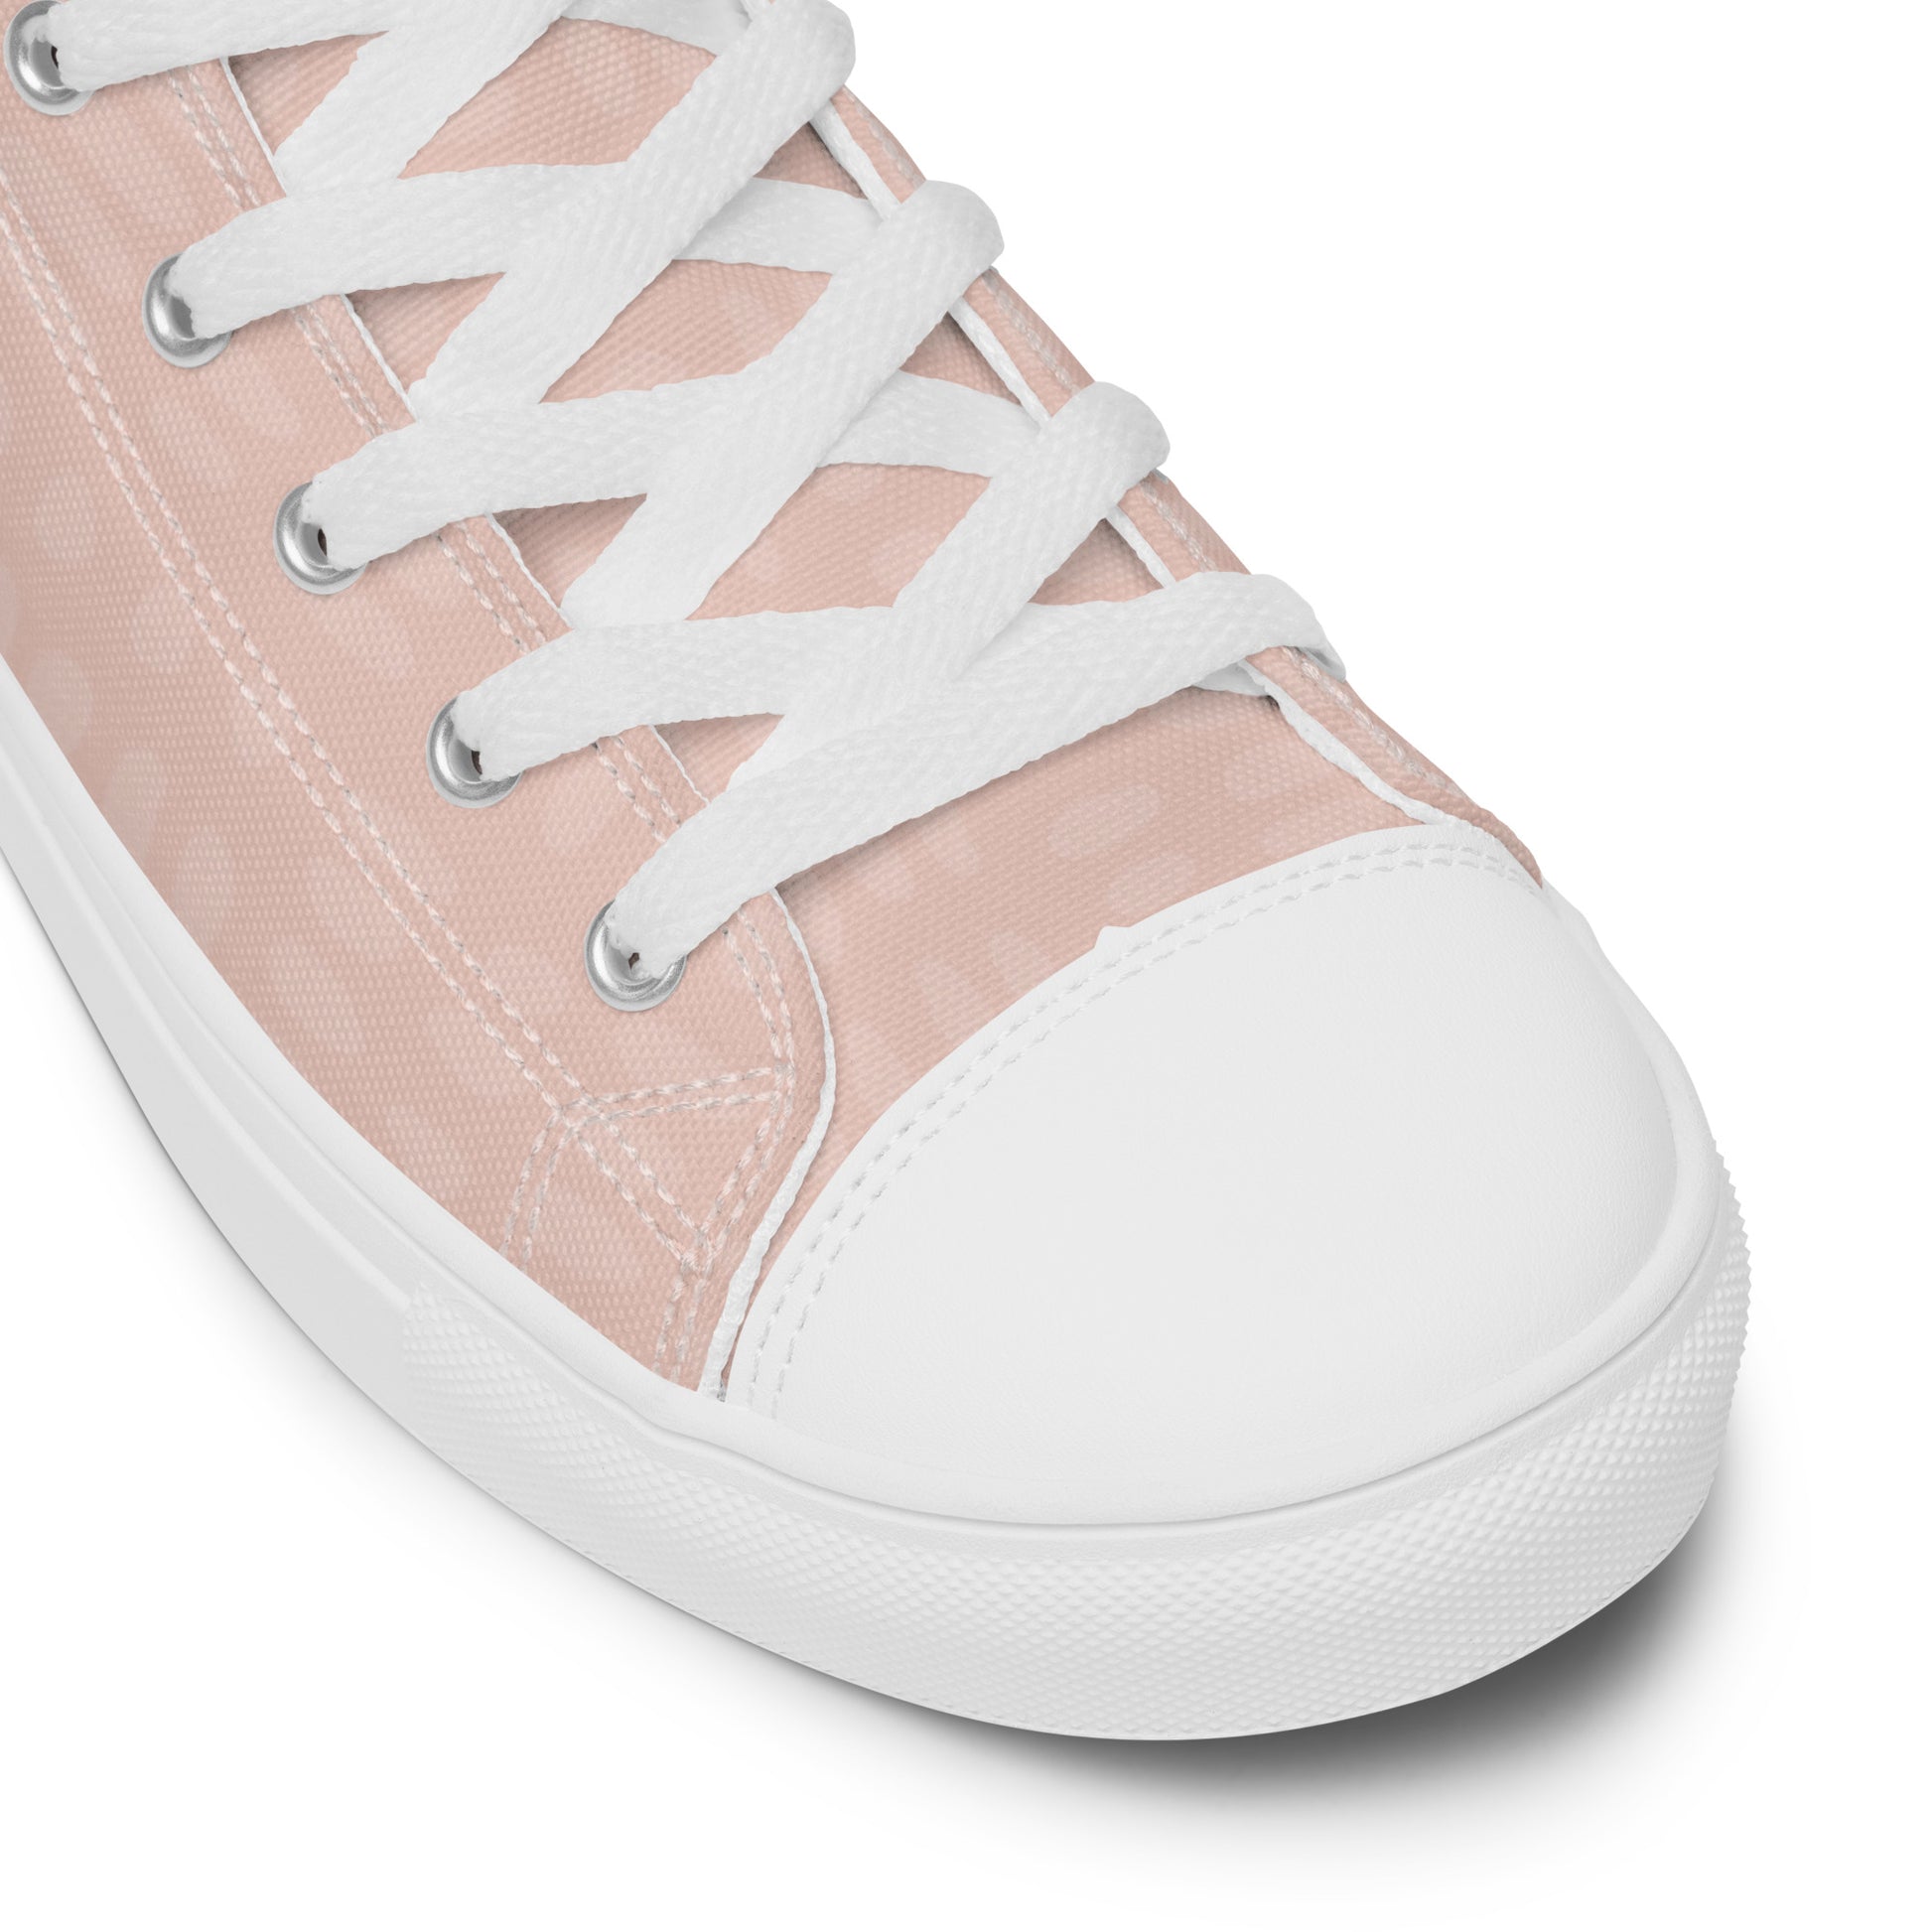 Women’s High Top Sneakers in King Protea Pink - familiar...yet different